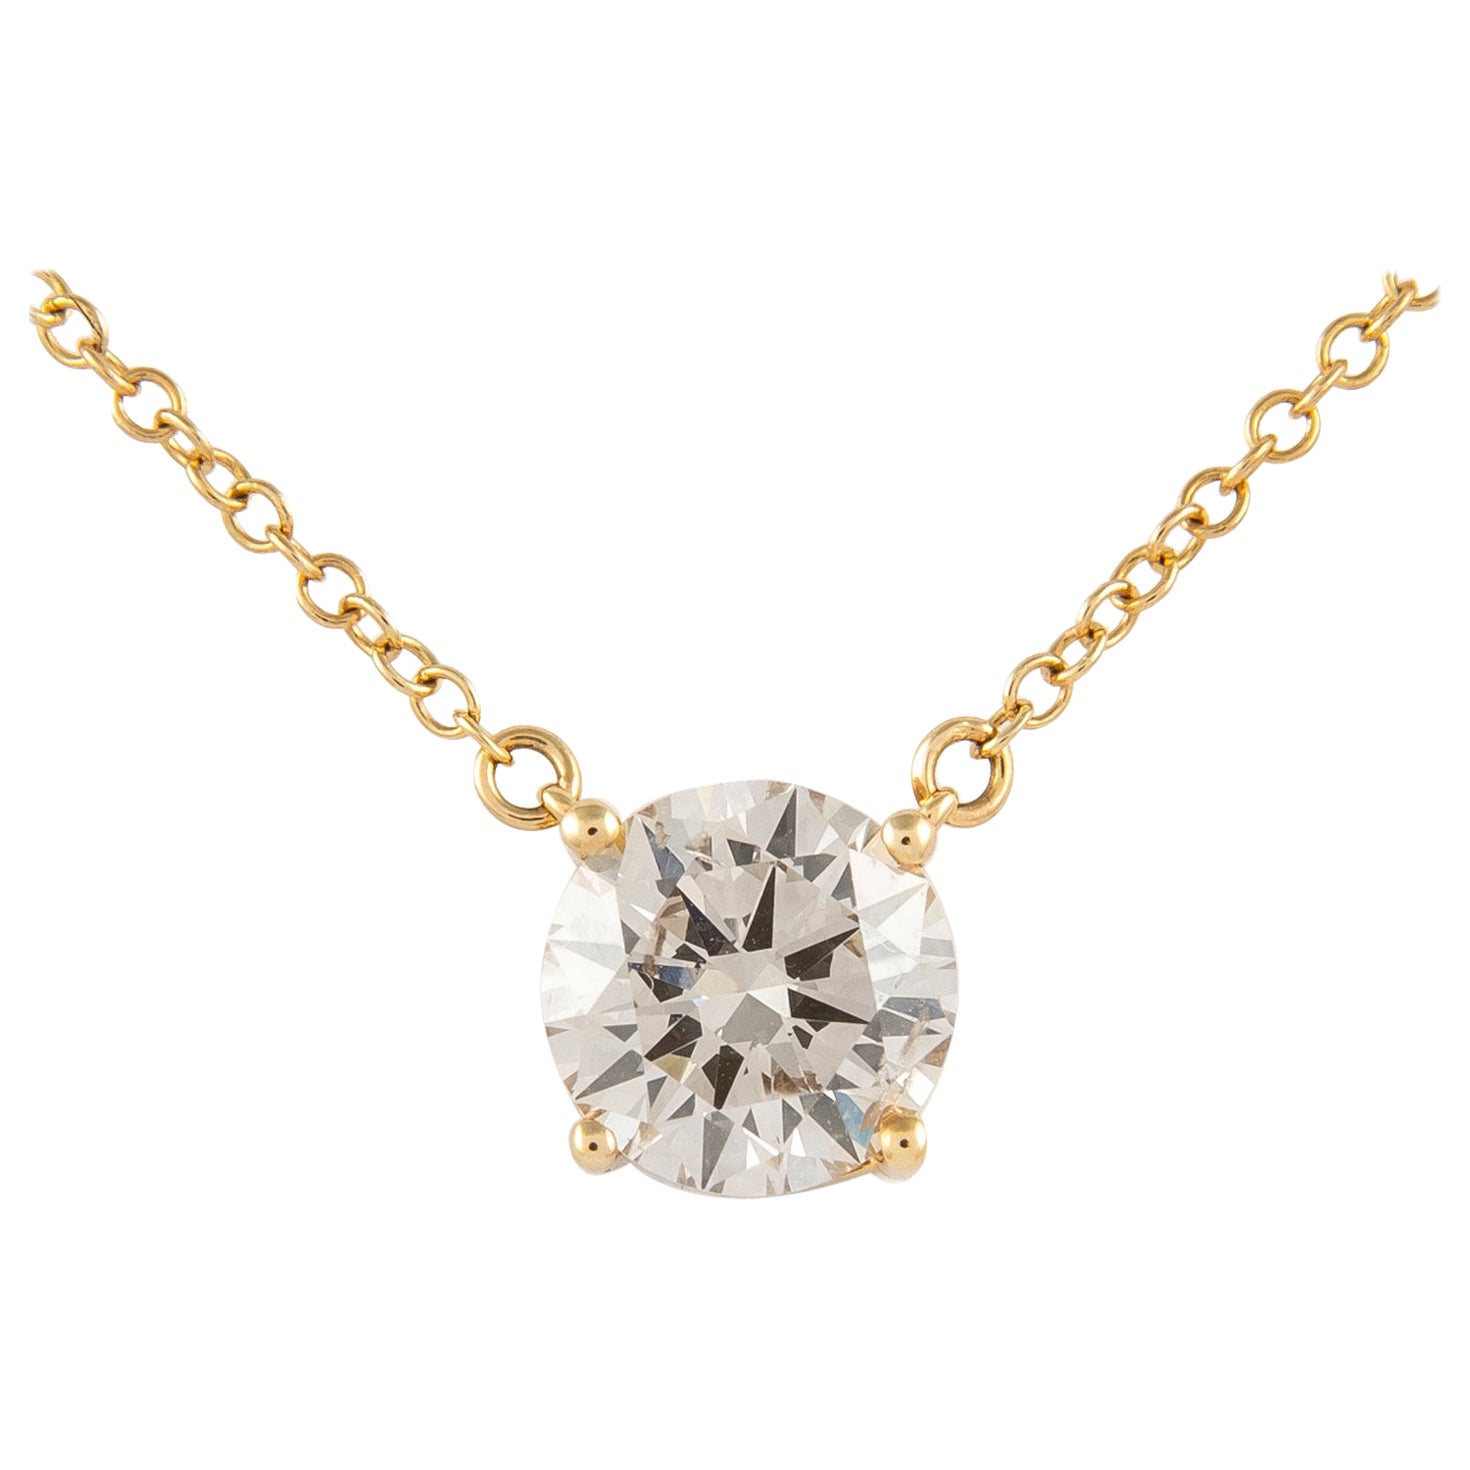 Alexander 1.51 Carats Diamond Solitaire Pendant Necklace Yellow Gold For Sale